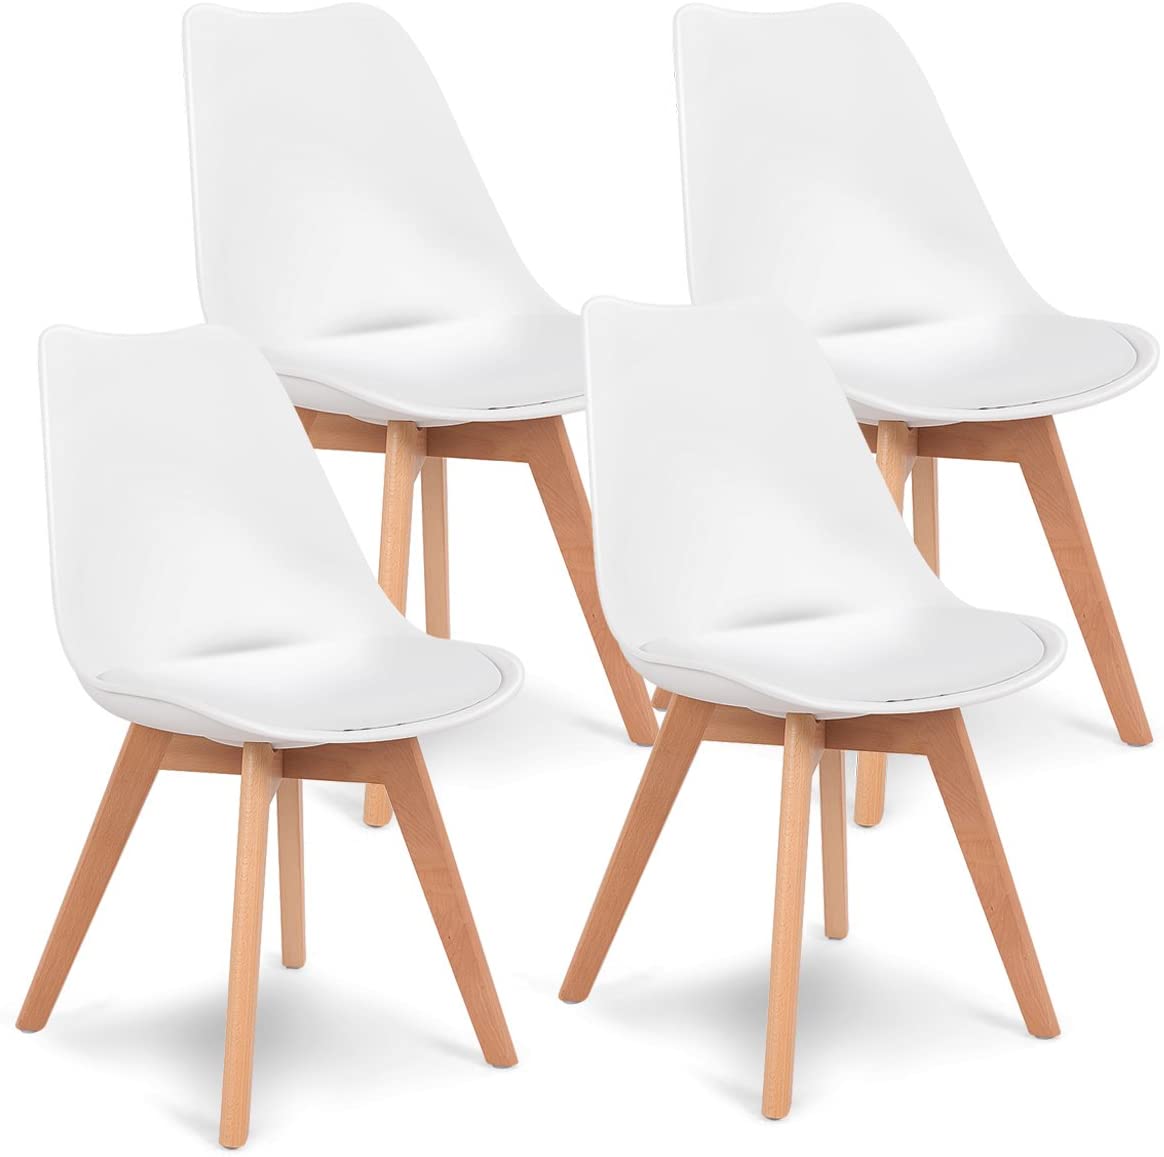 Set of 4 Mid Century Dining Chairs Wood Legs White